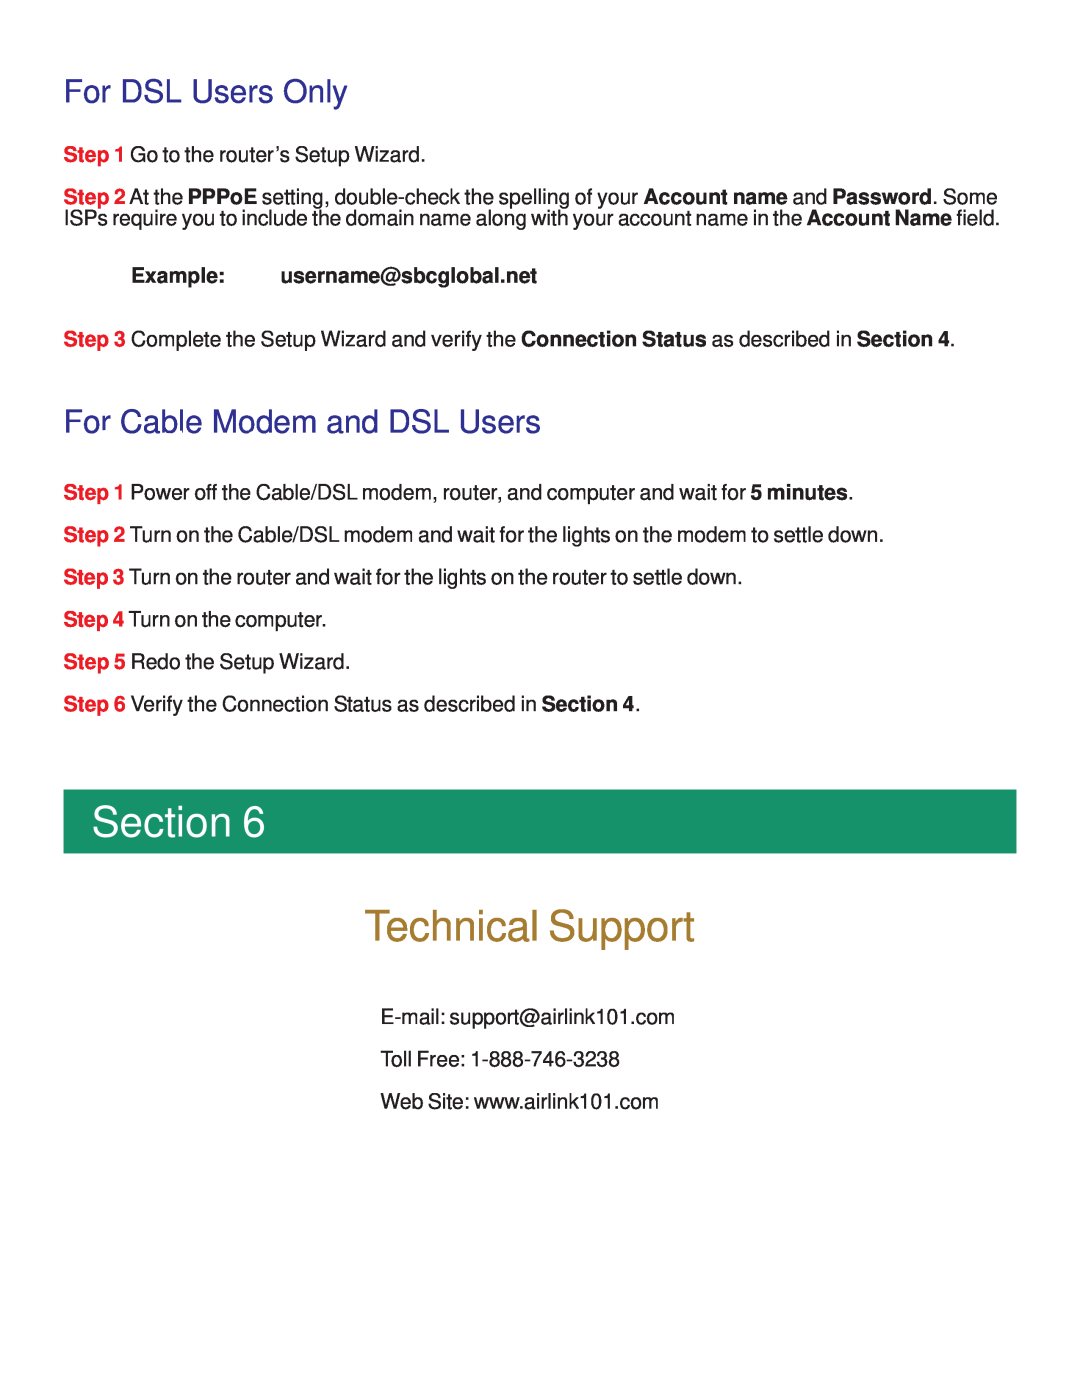 Airlink101 AR504 manual Technical Support, For DSL Users Only, For Cable Modem and DSL Users, Section 